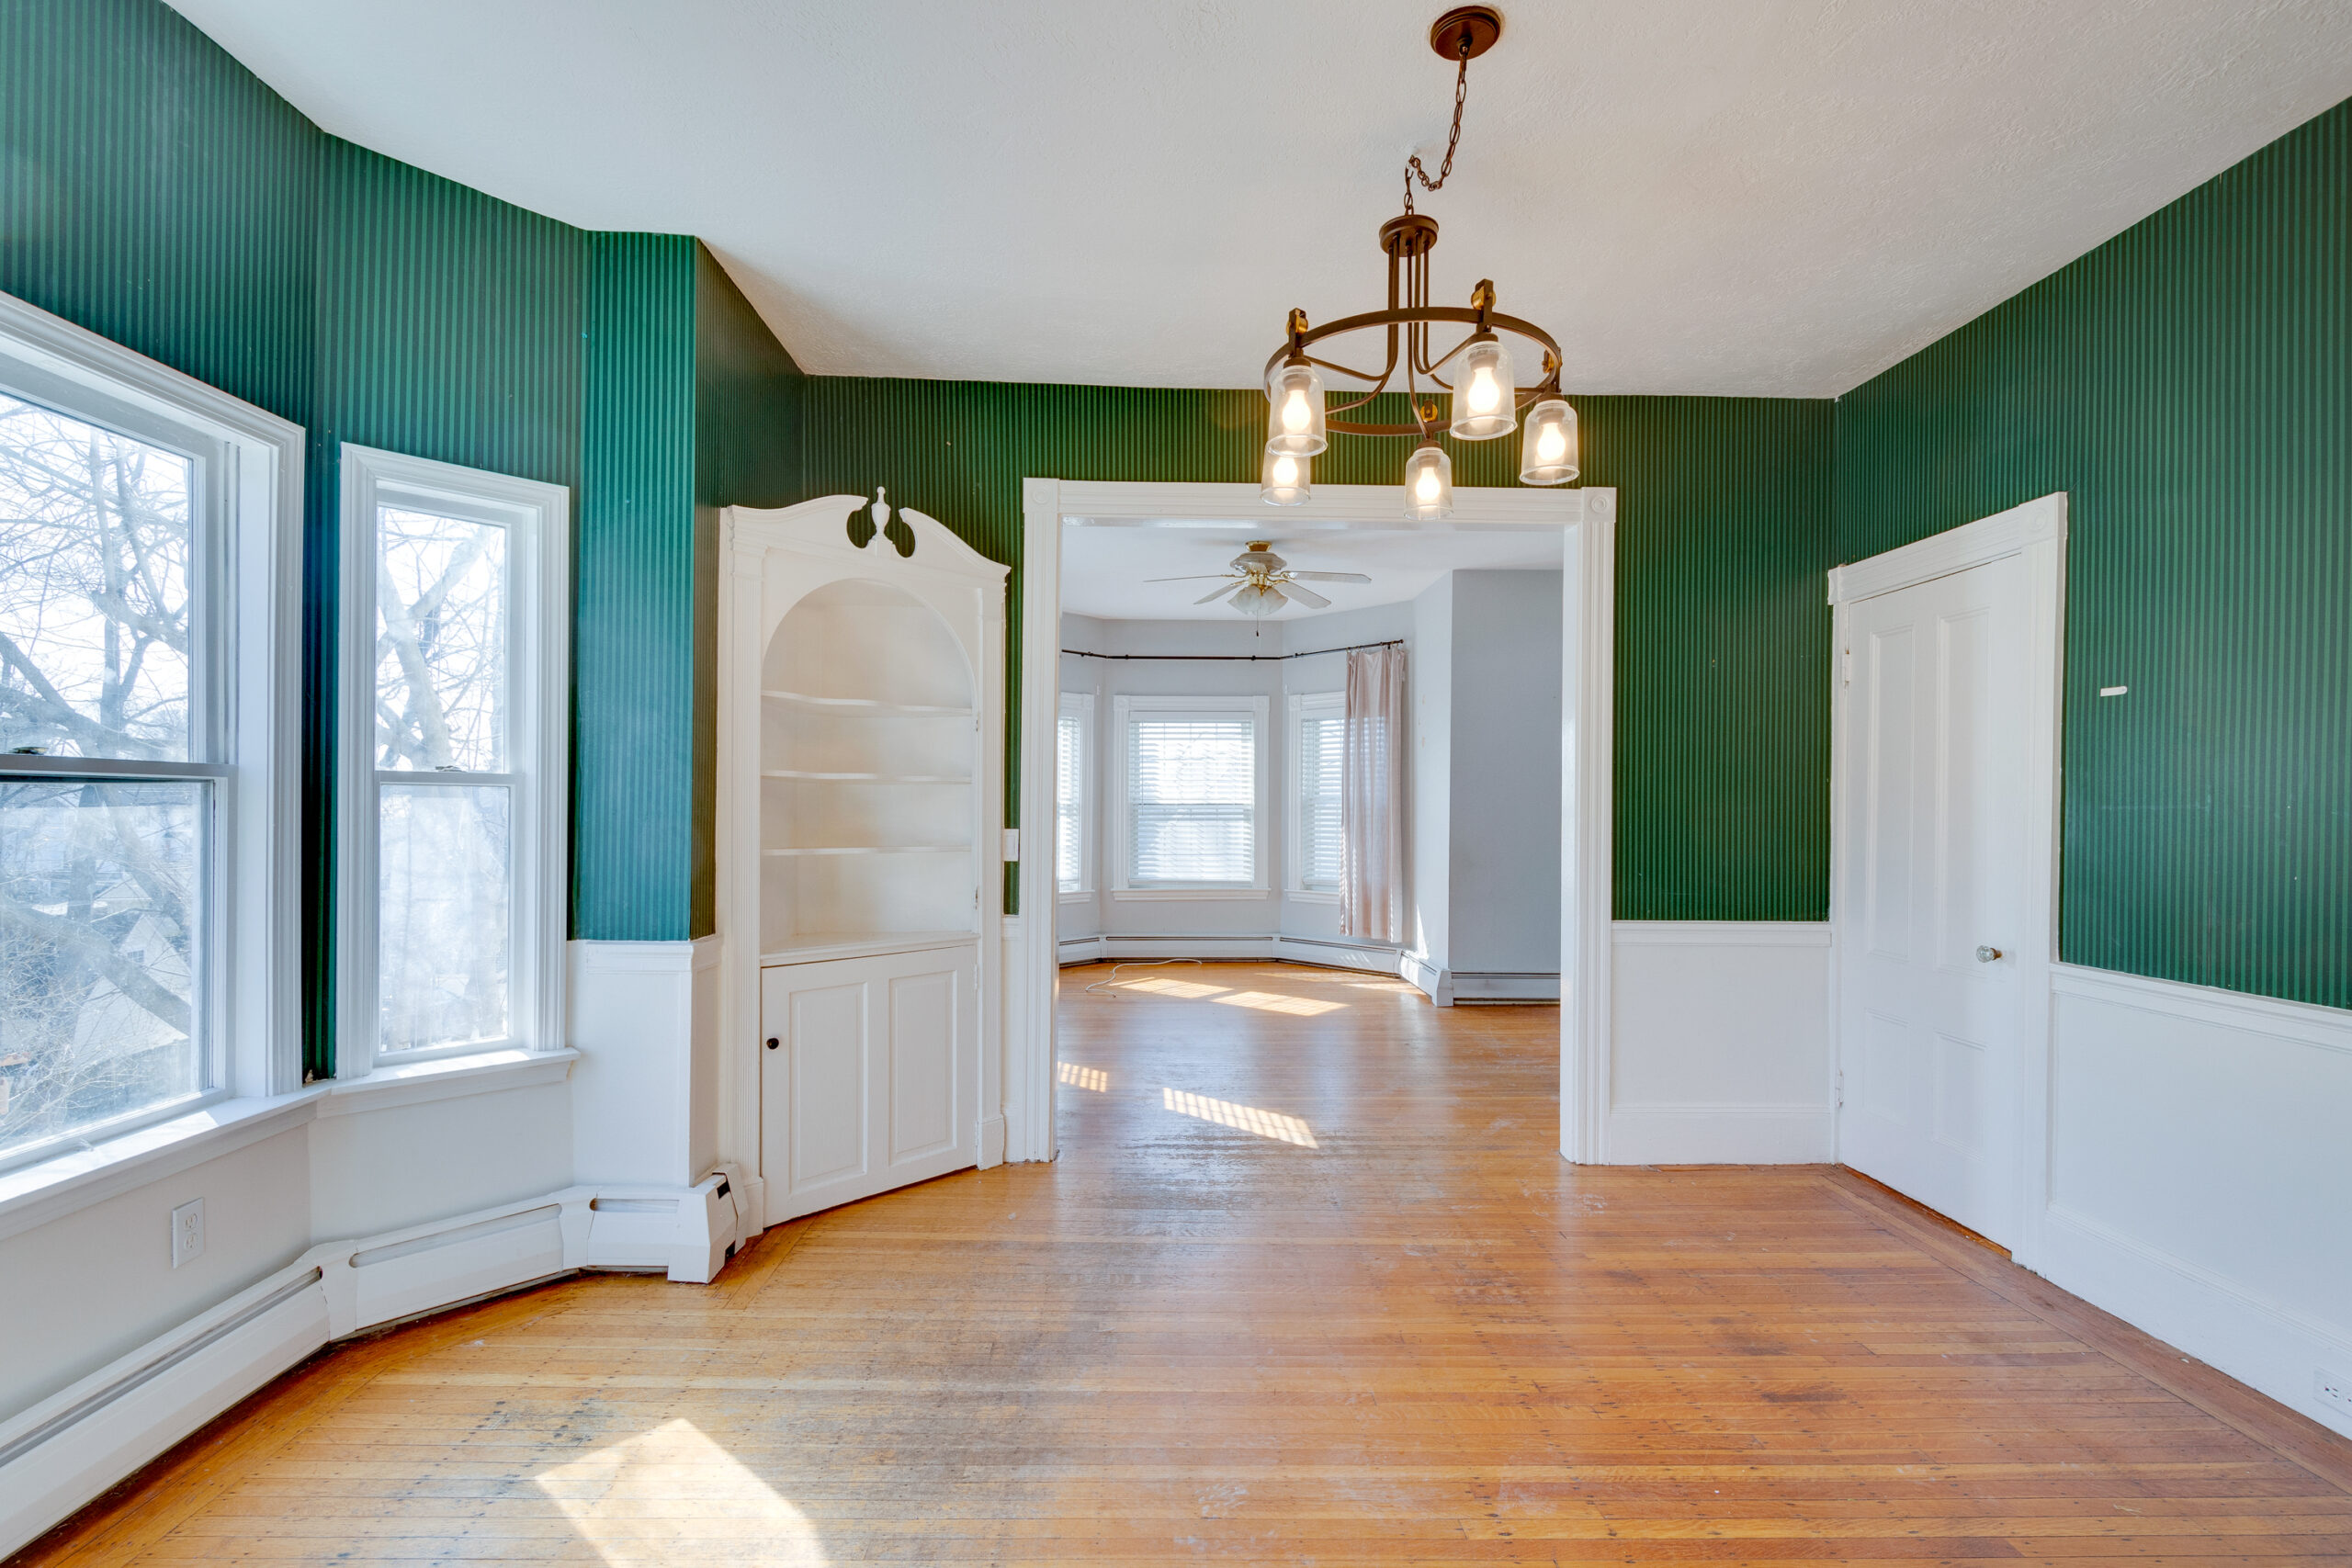 Image of a bay window area in the dining room of a vintage New England home before renovation. The space features dark green wallpaper above white wainscoting and a built-in corner cabinet. The bay windows allow ample natural light to flood the room, which has worn hardwood floors and an old chandelier. The adjacent room with yellow walls indicates a dated and eclectic interior style, emphasizing the need for renovation.